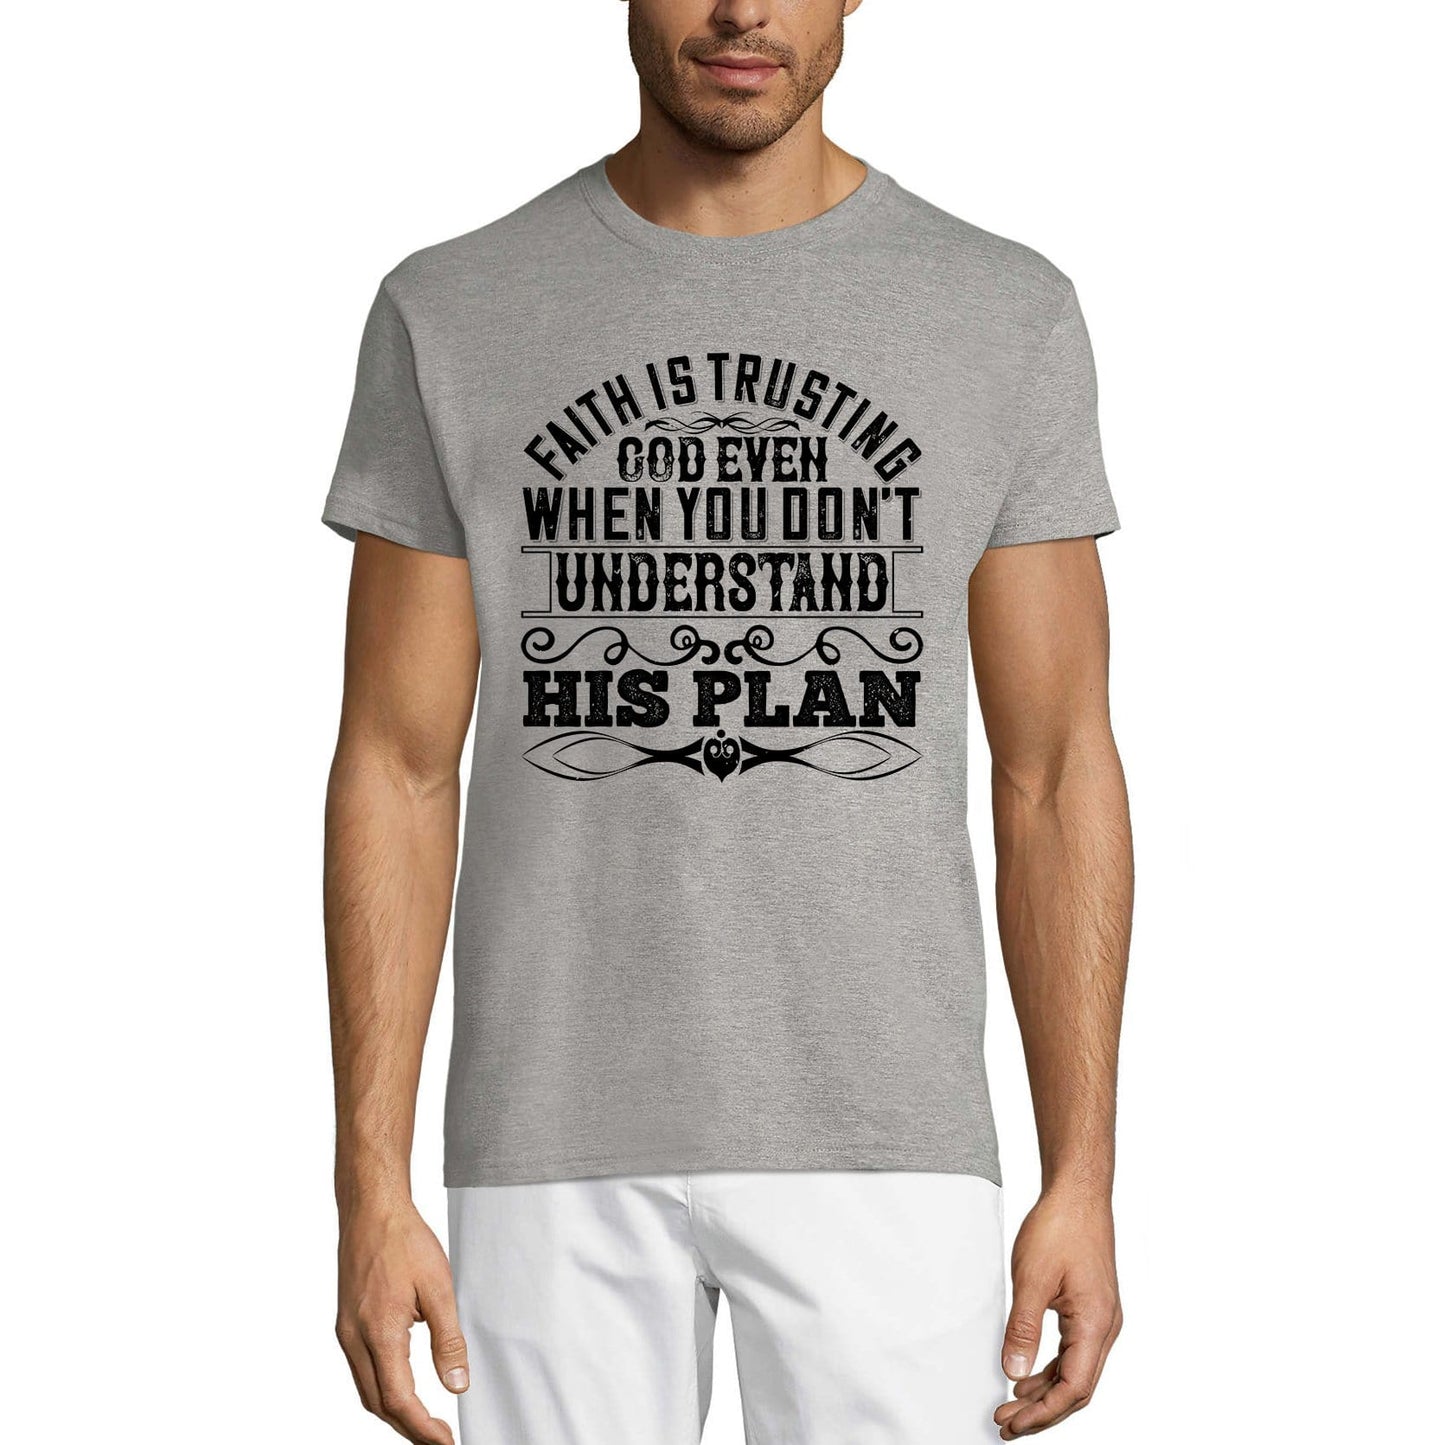 ULTRABASIC Men's T-Shirt Faith is Trusting God Even When You Don't Understand His Plan - Muslim Tee Shirt